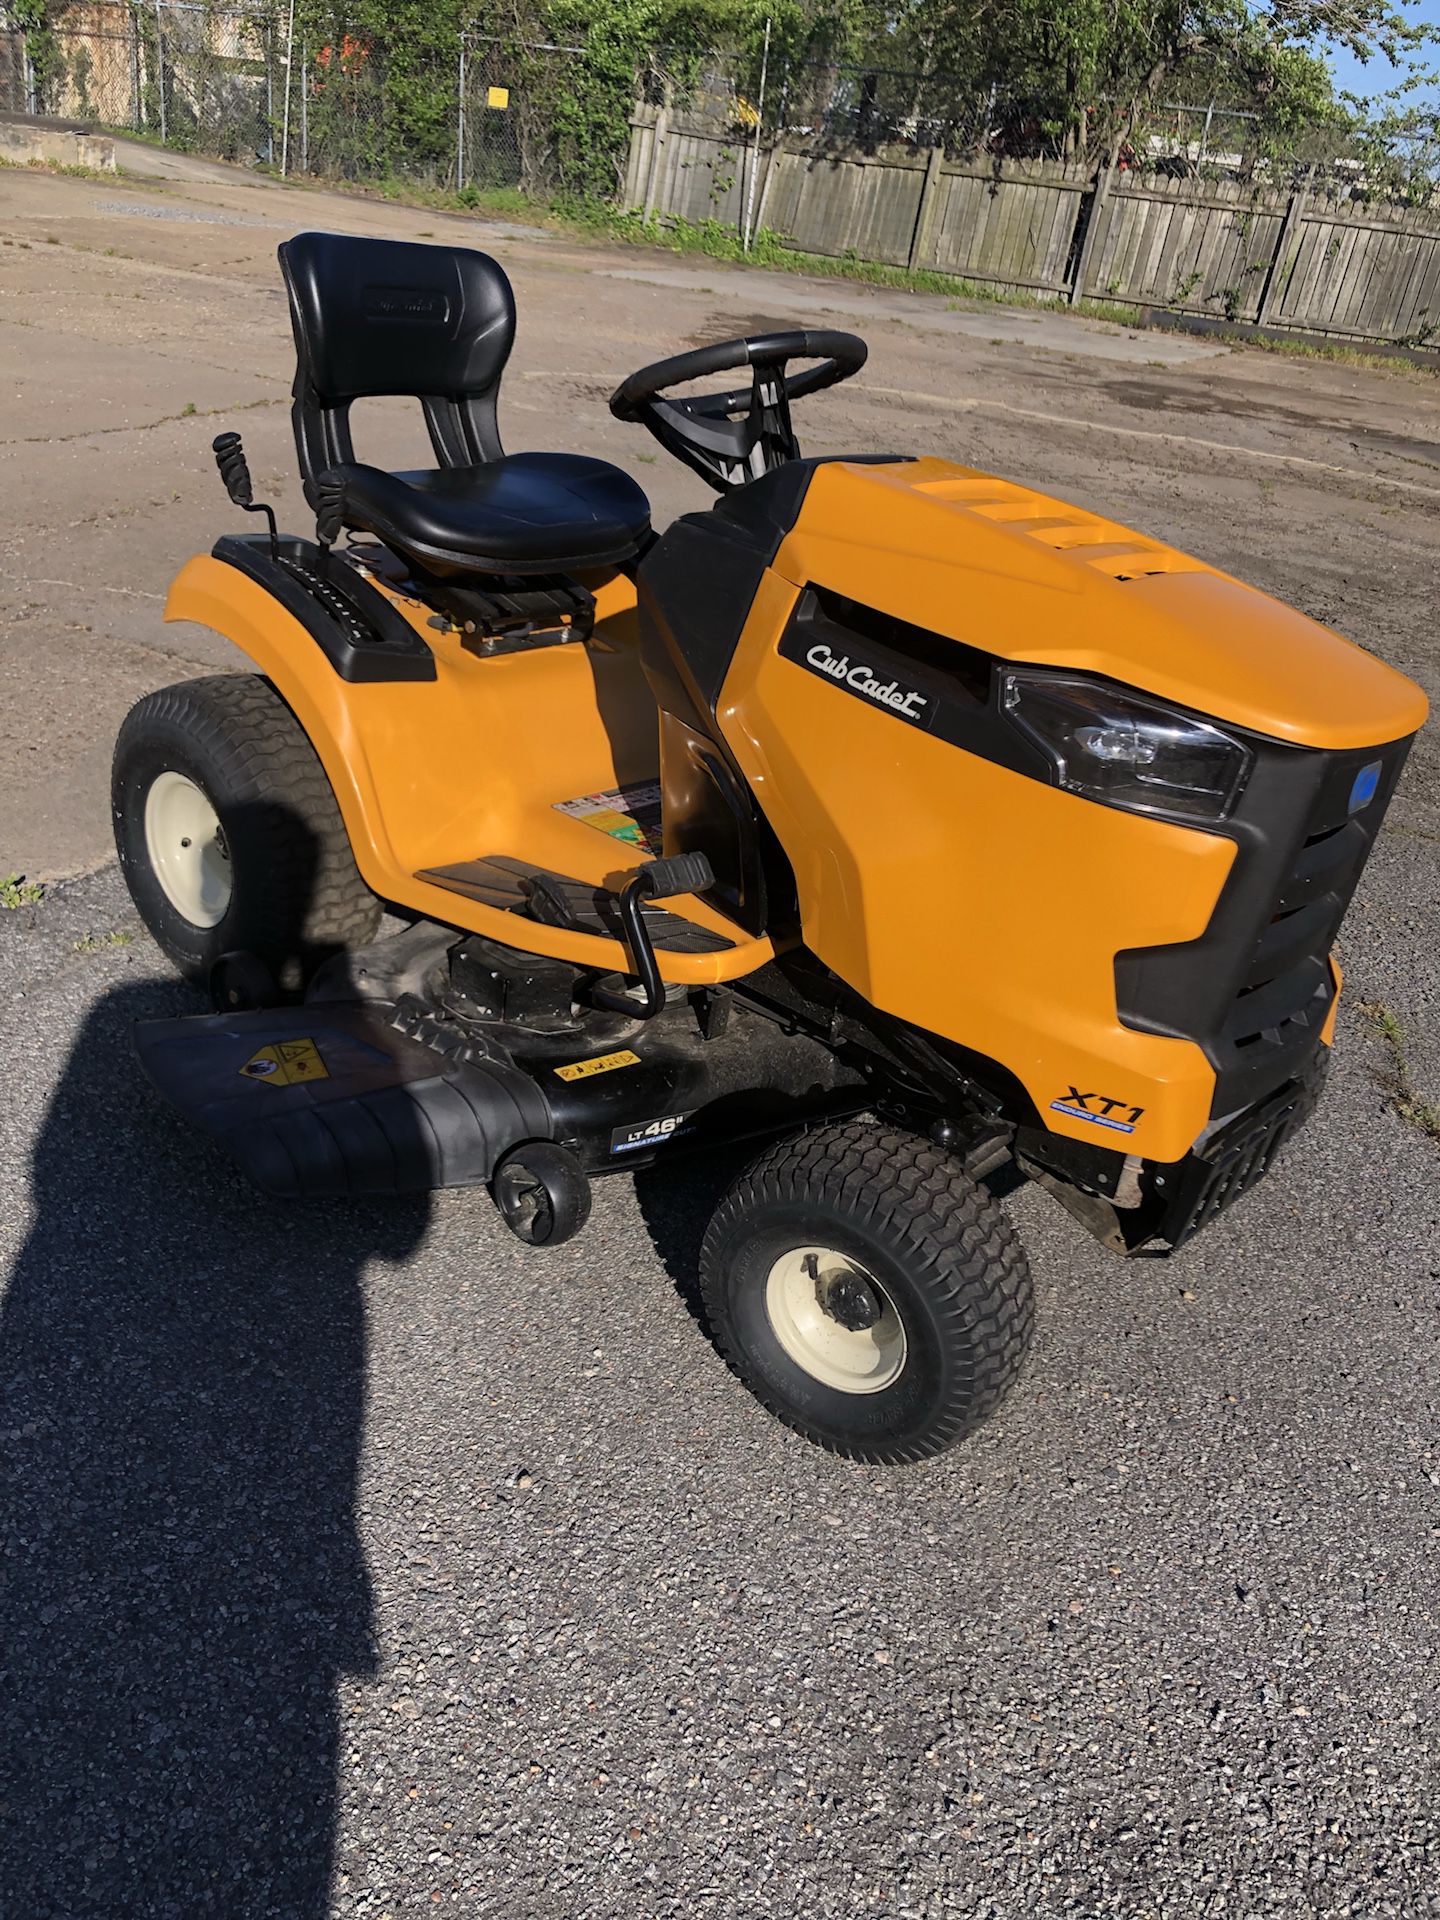 Cub Cadet Riding Mower comes lawn sweeper